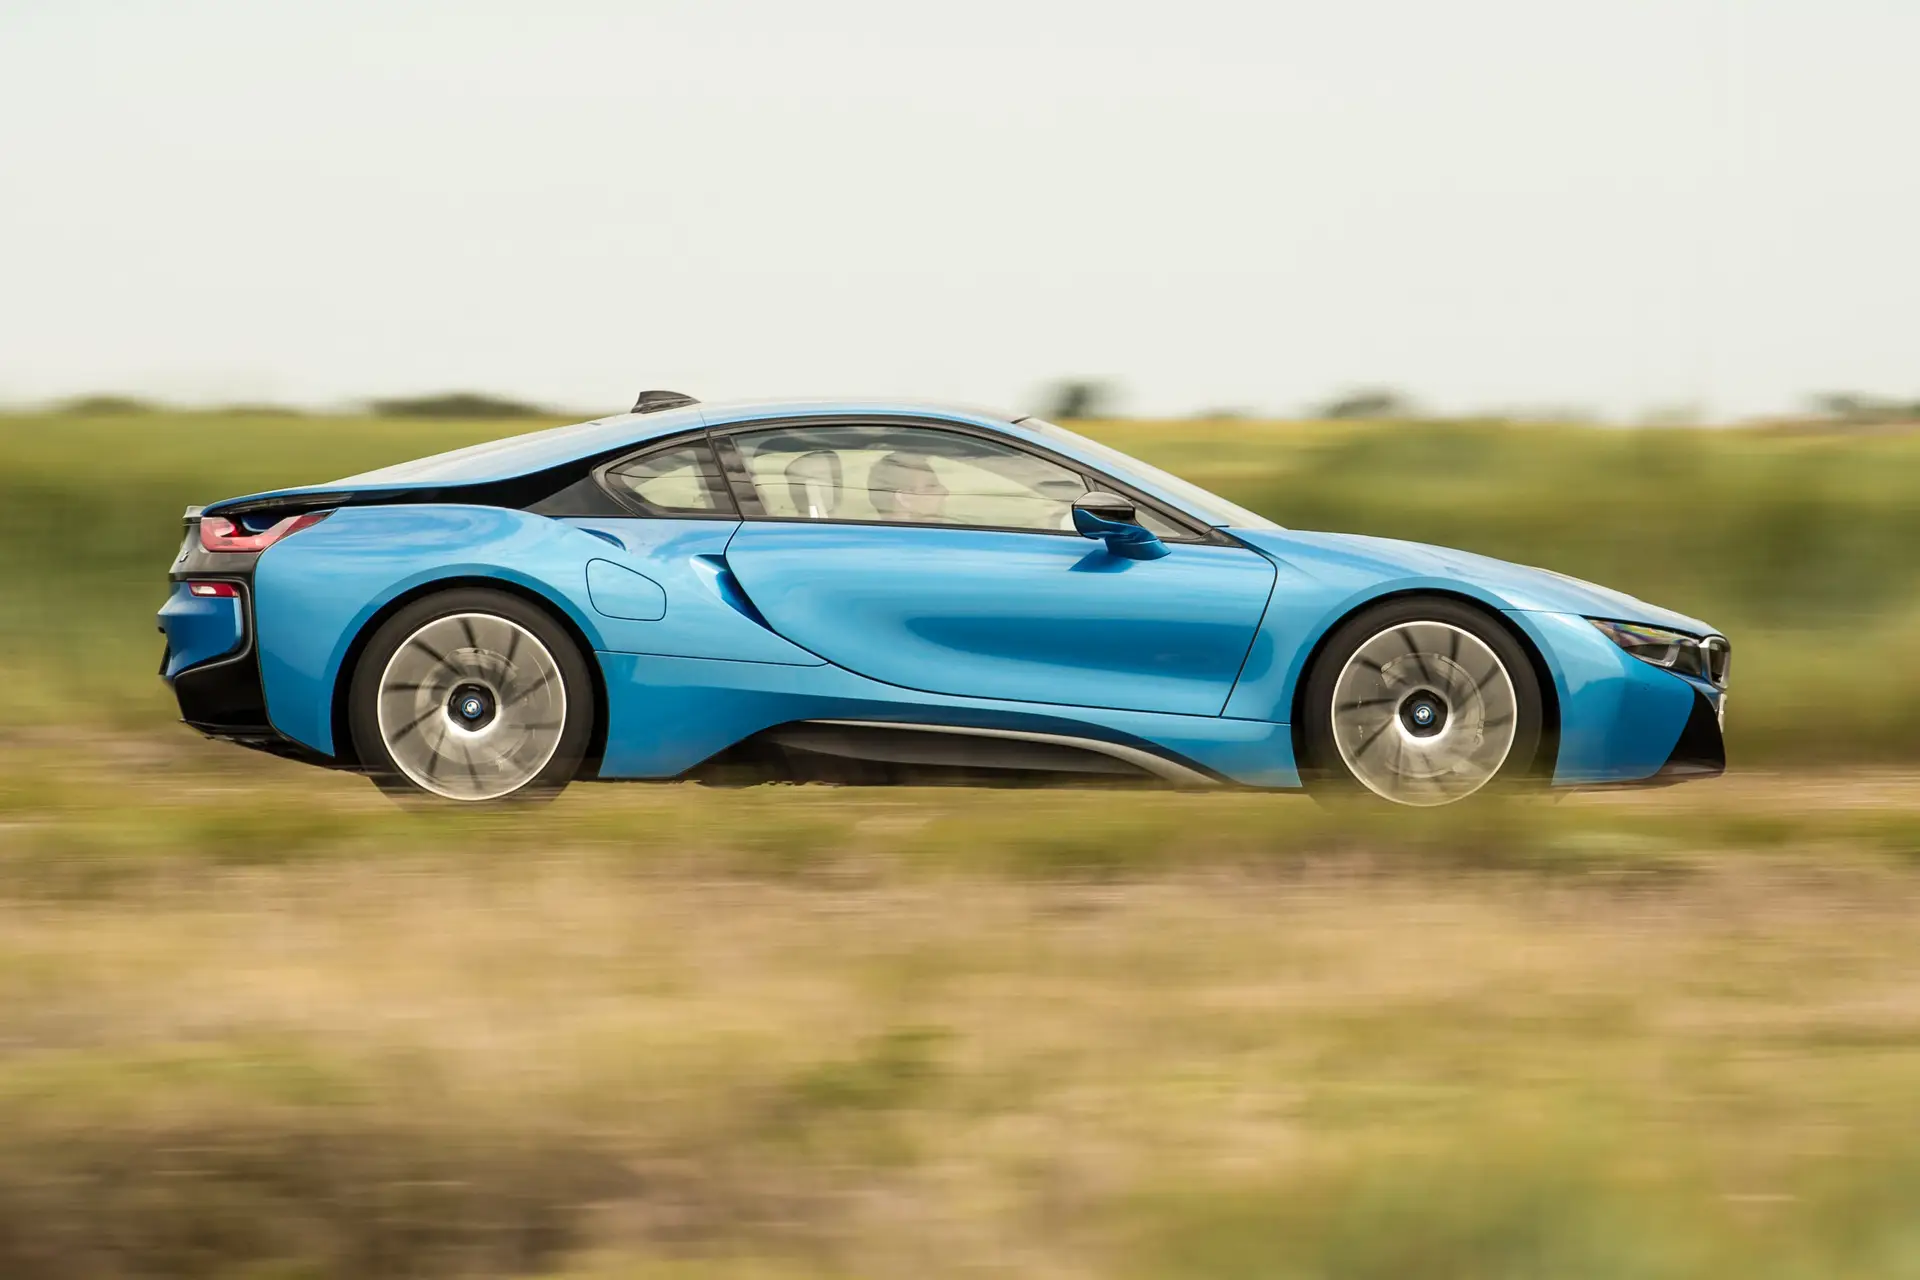 BMW i8 (2014-2020) Review: exterior side photo of the BMW i8 on the road 